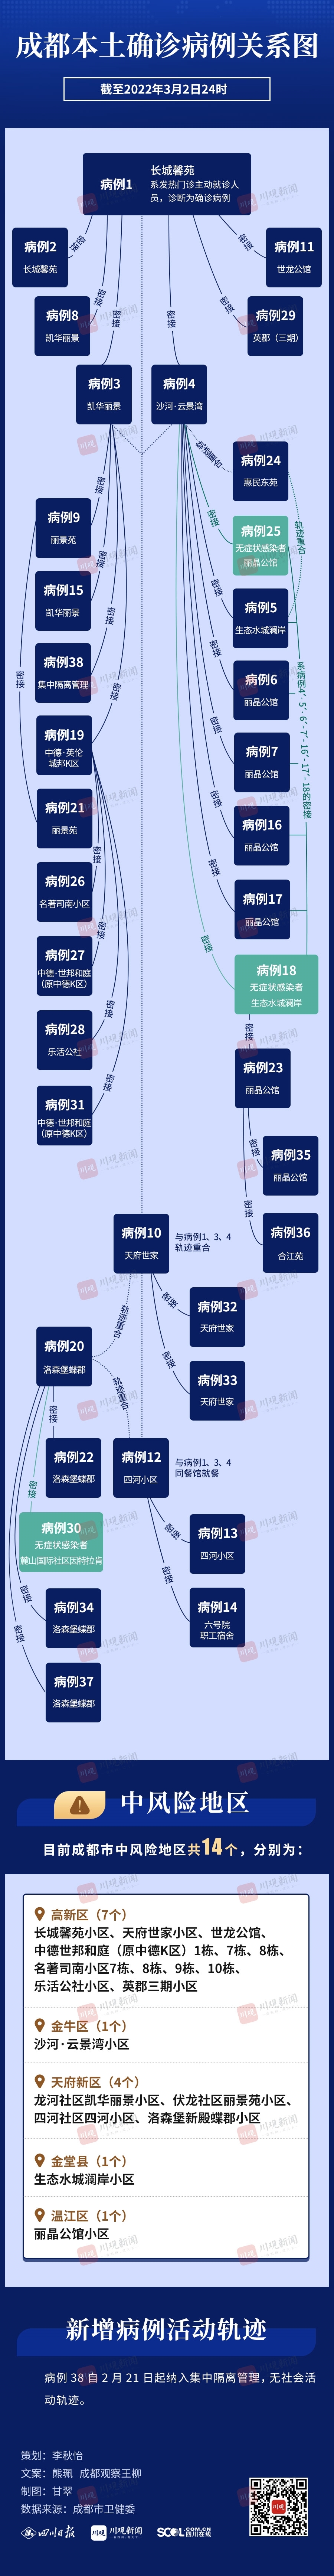 A Picture to Understand the Local Infection Cases in Chengdu (as of 24:00 on March 2)